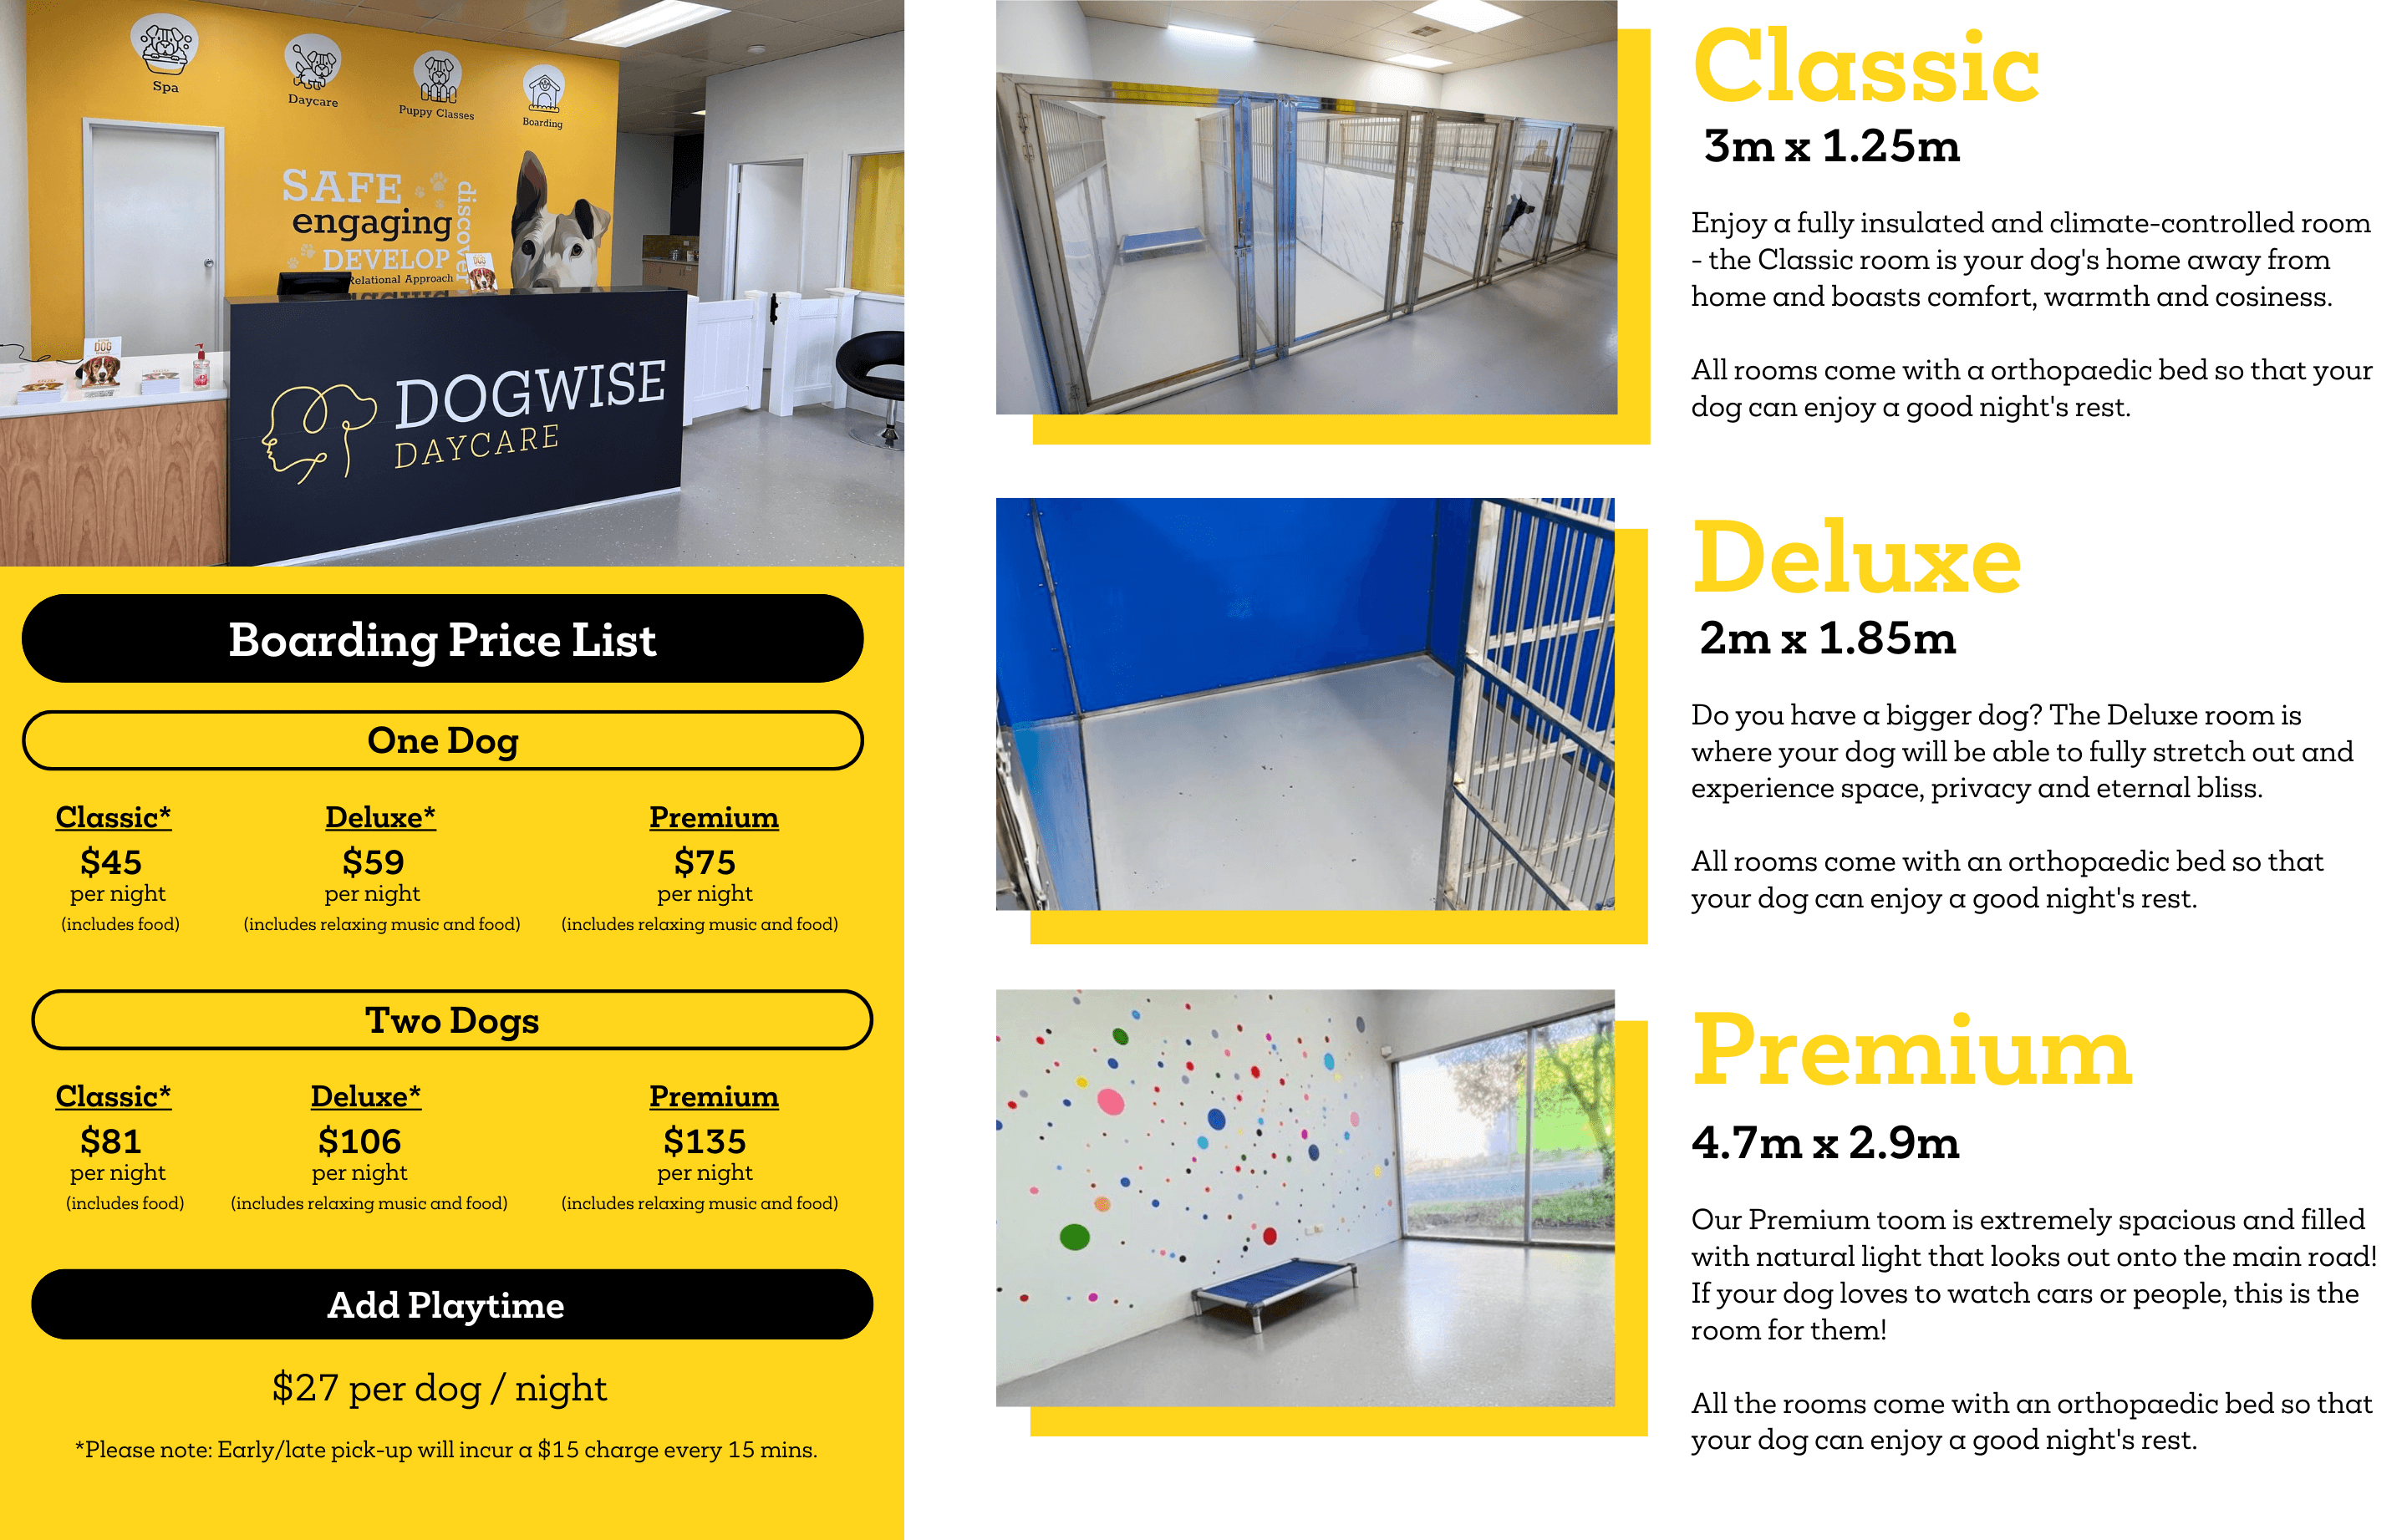 Dogwise Daycare Adelaide Boarding Price List